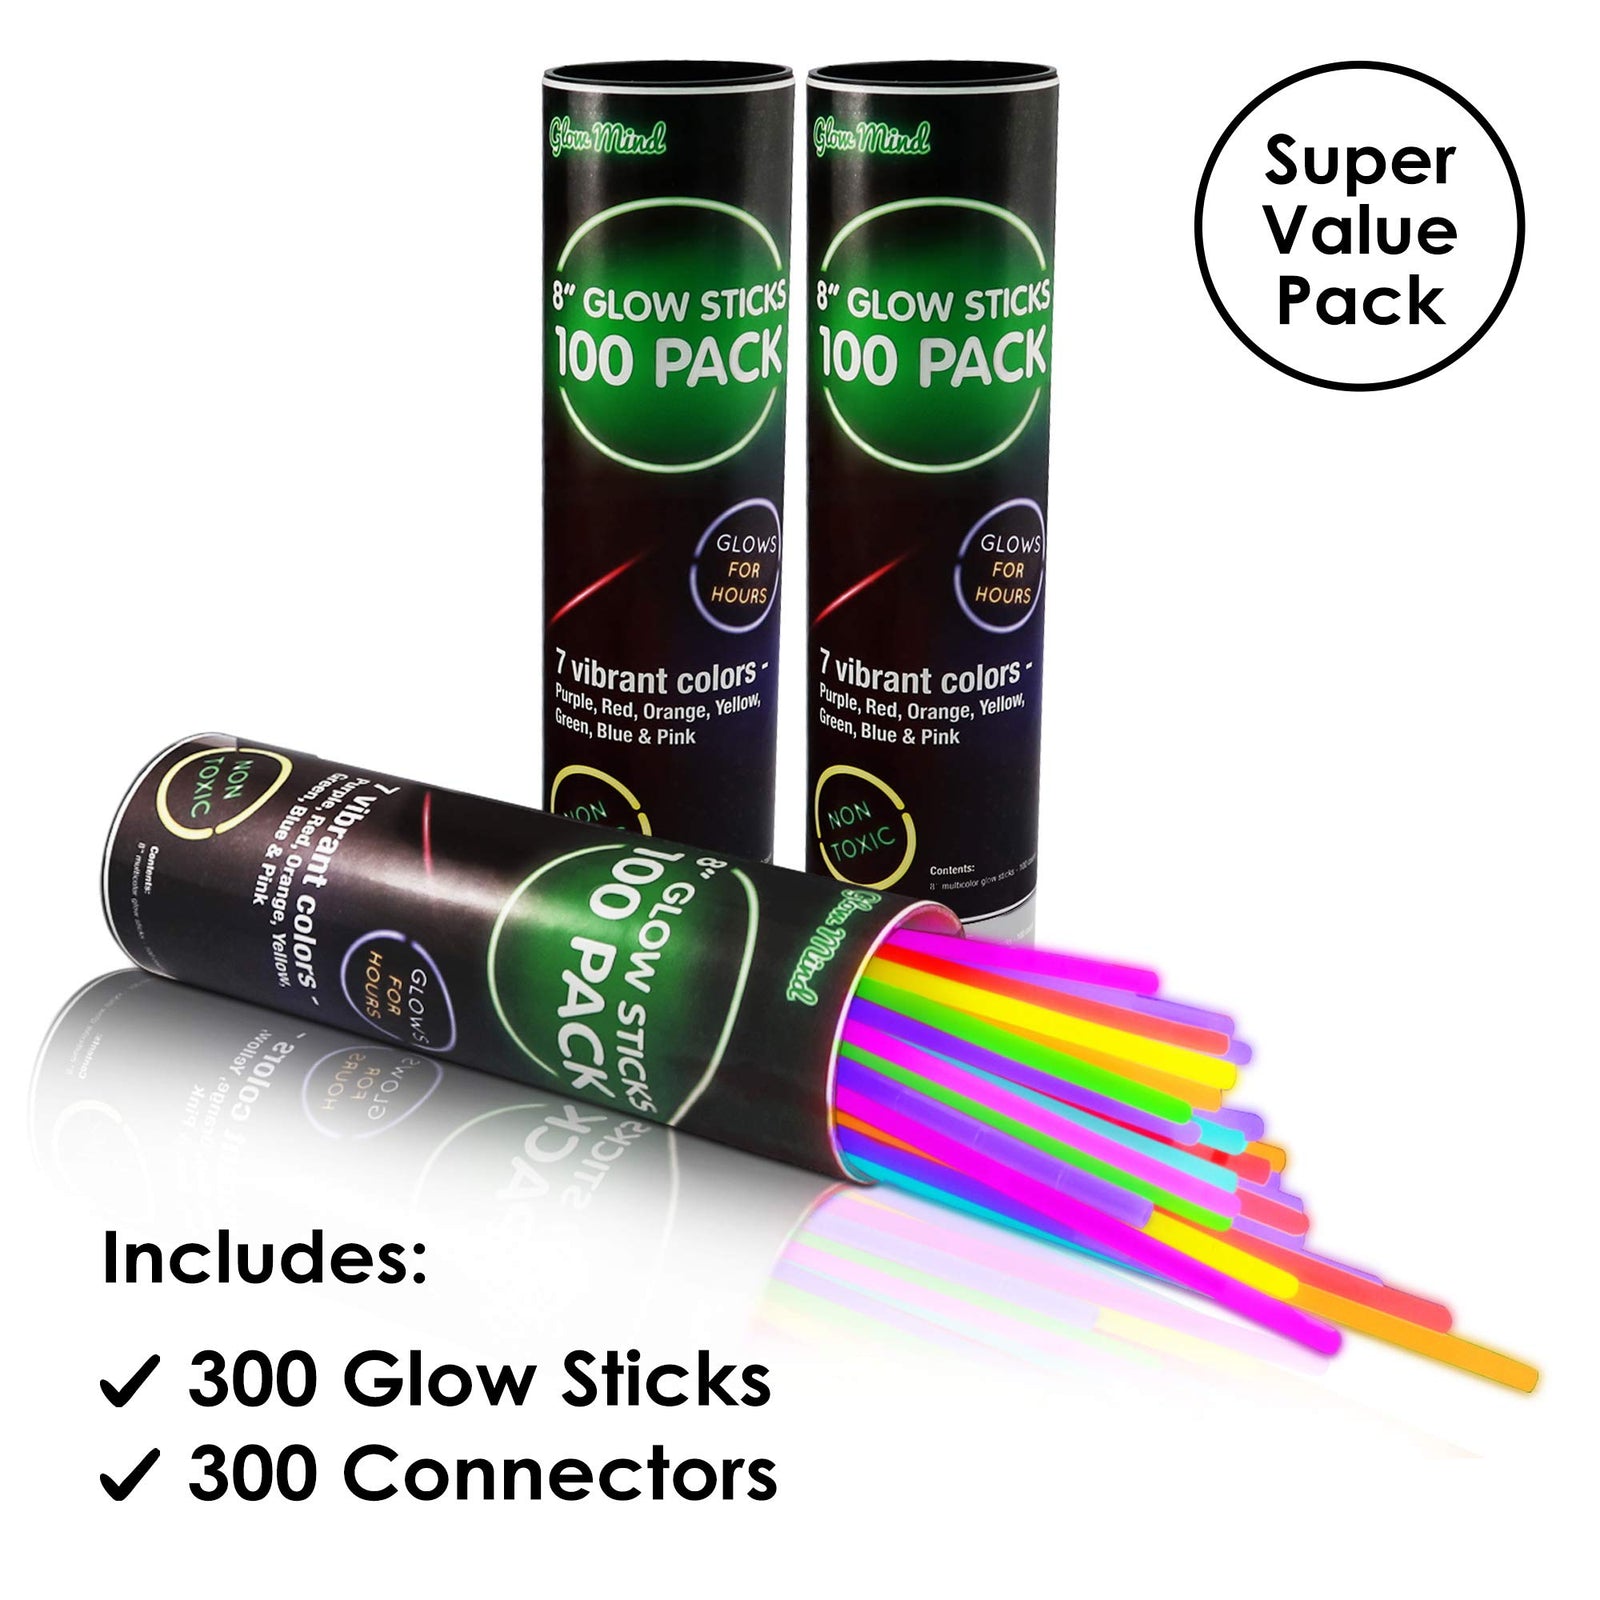 300 Glow Sticks Bulk Party Supplies - Halloween Glow in The Dark Fun Party Favors Pack with Connectors, Neon 8 inch Glowsticks Bracelets and Necklaces